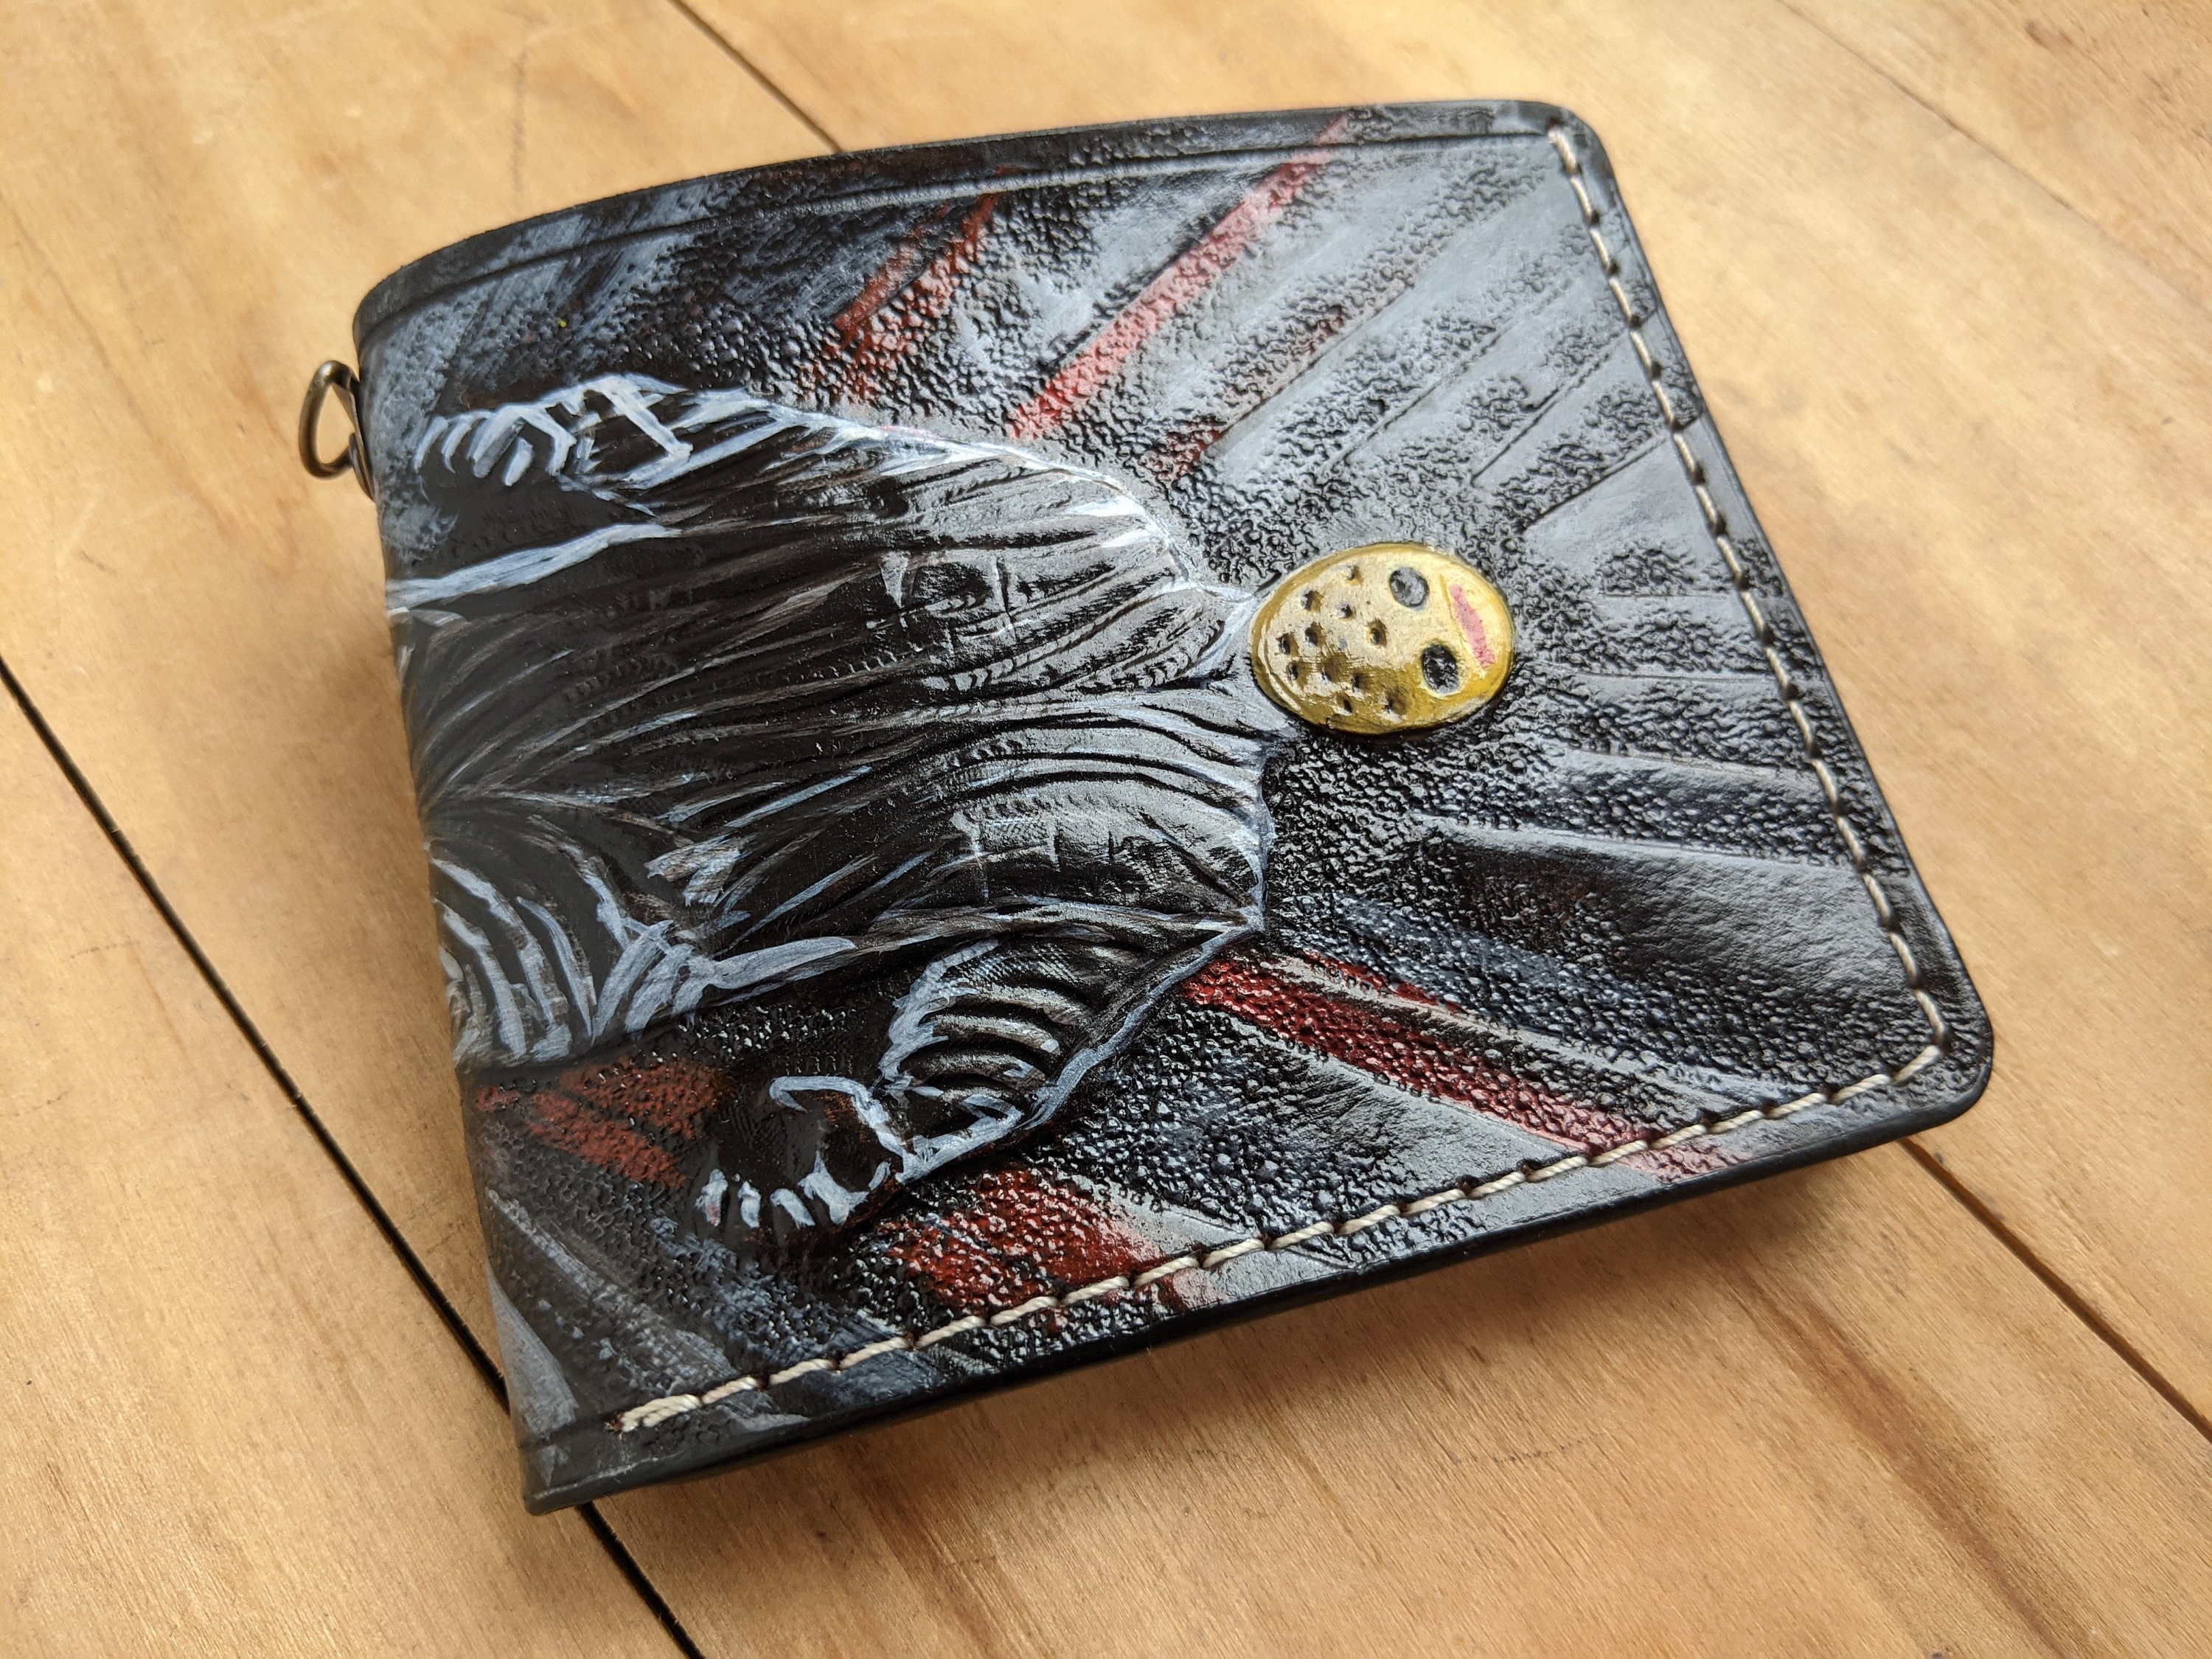 Men's 3D Genuine Leather Wallet, Hand-Carved, Hand-Painted, Leather Carving, Custom Wallet, Personalized Wallet, Spiderman